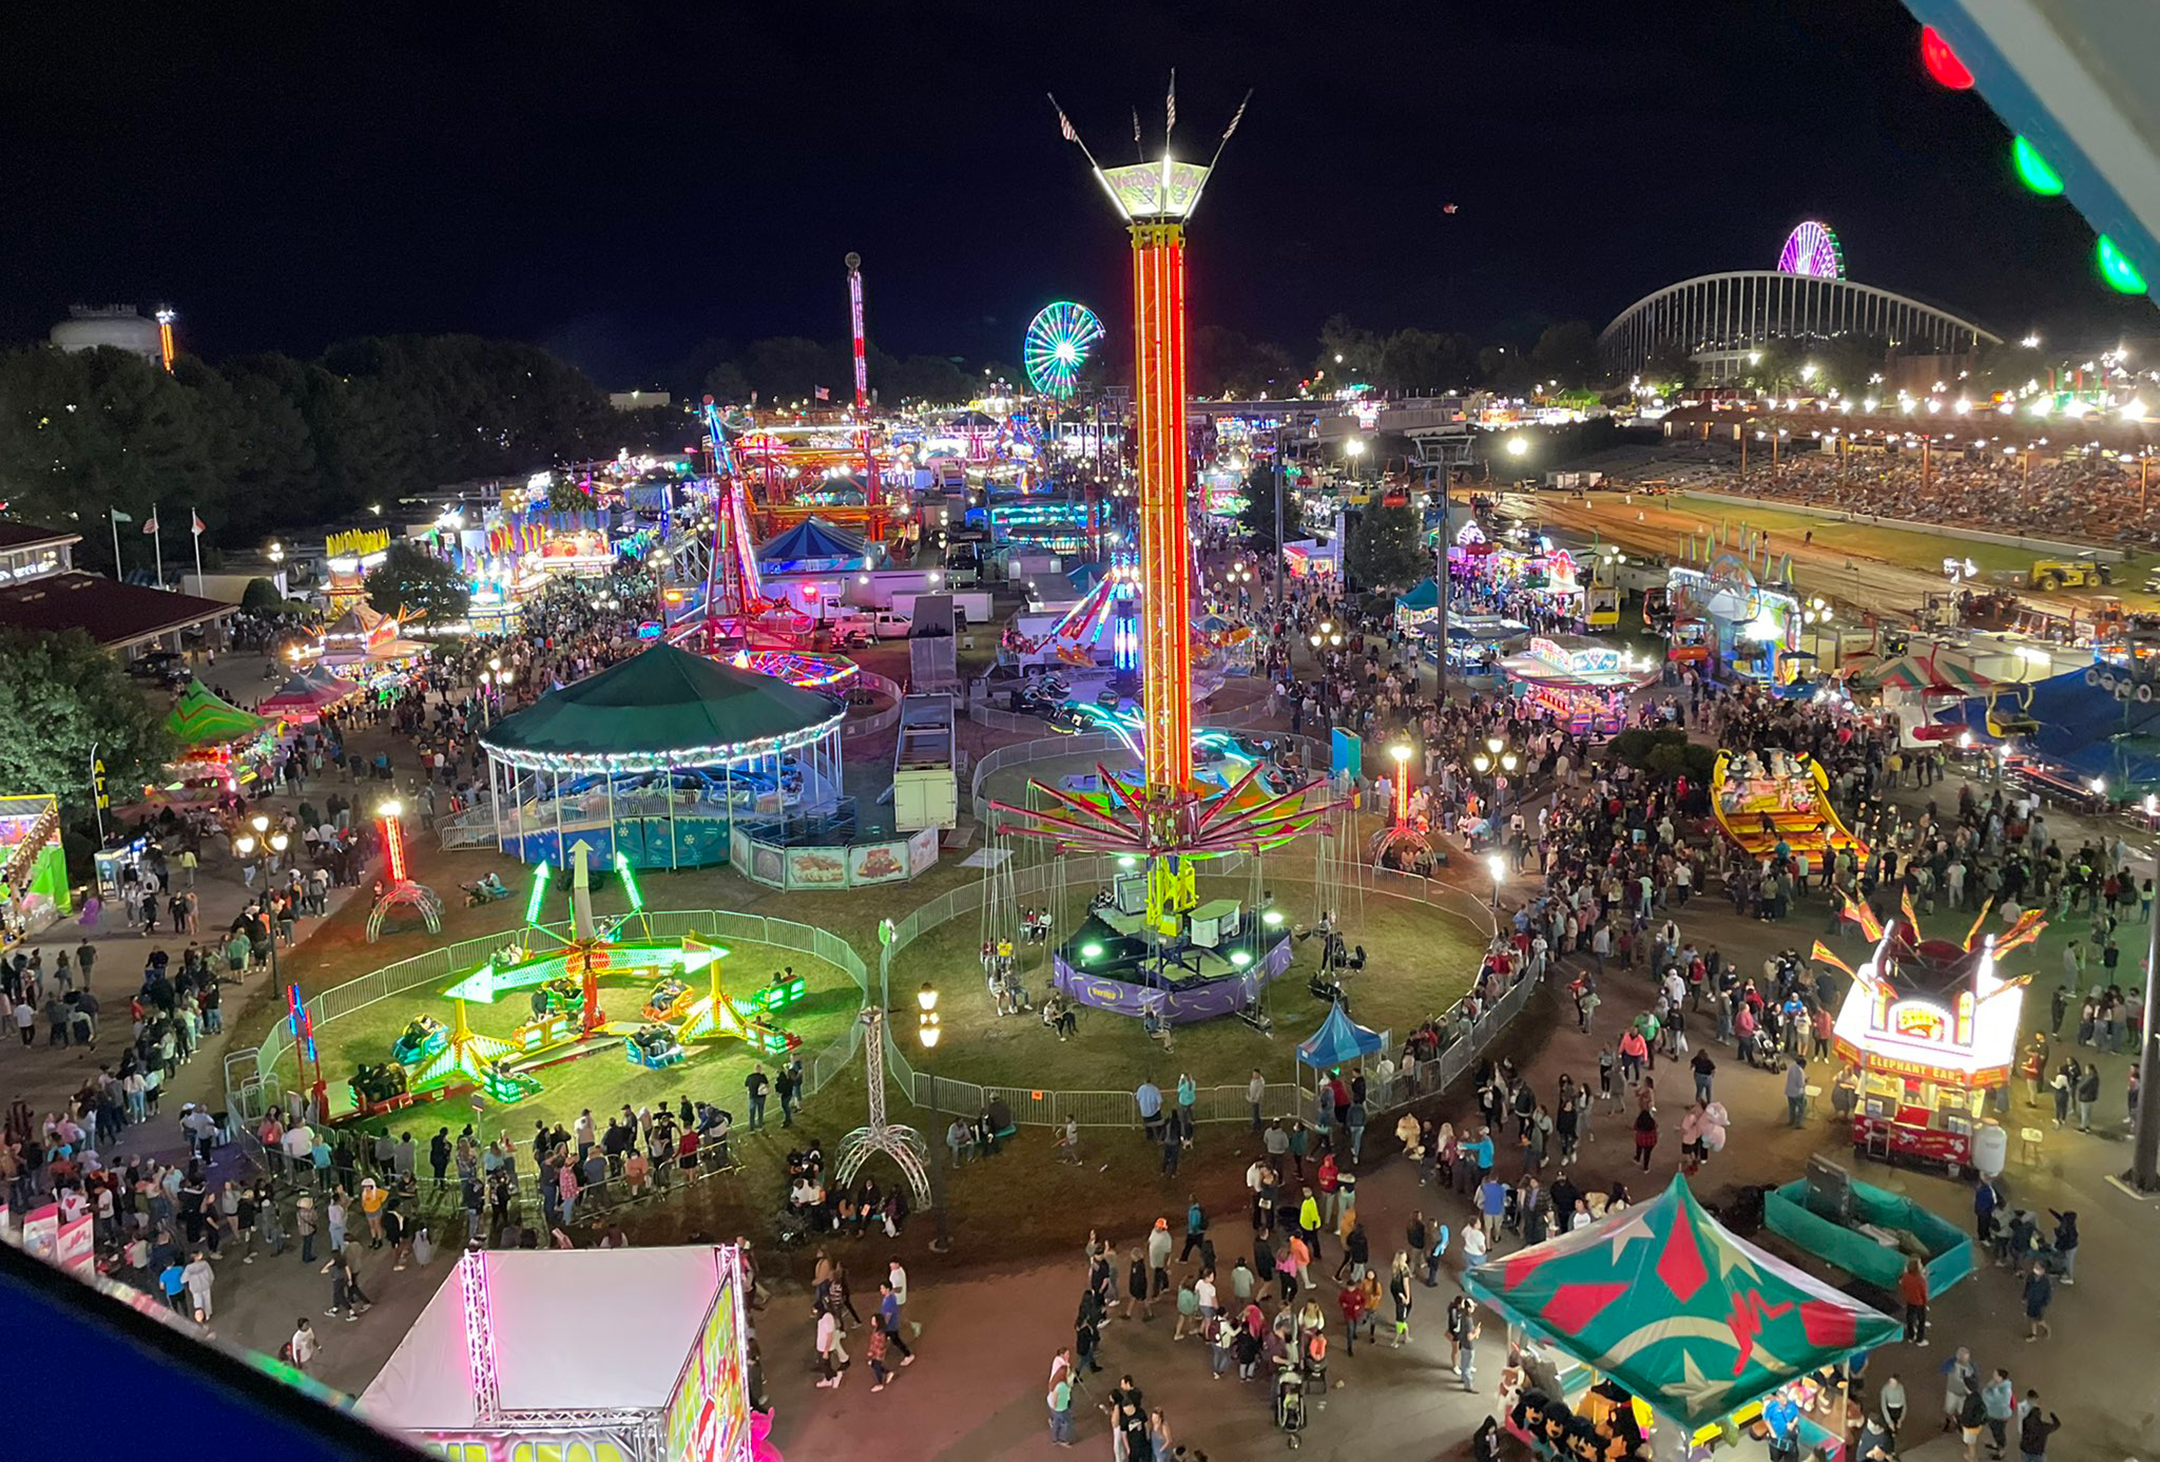 Aerial view of a state fair at night